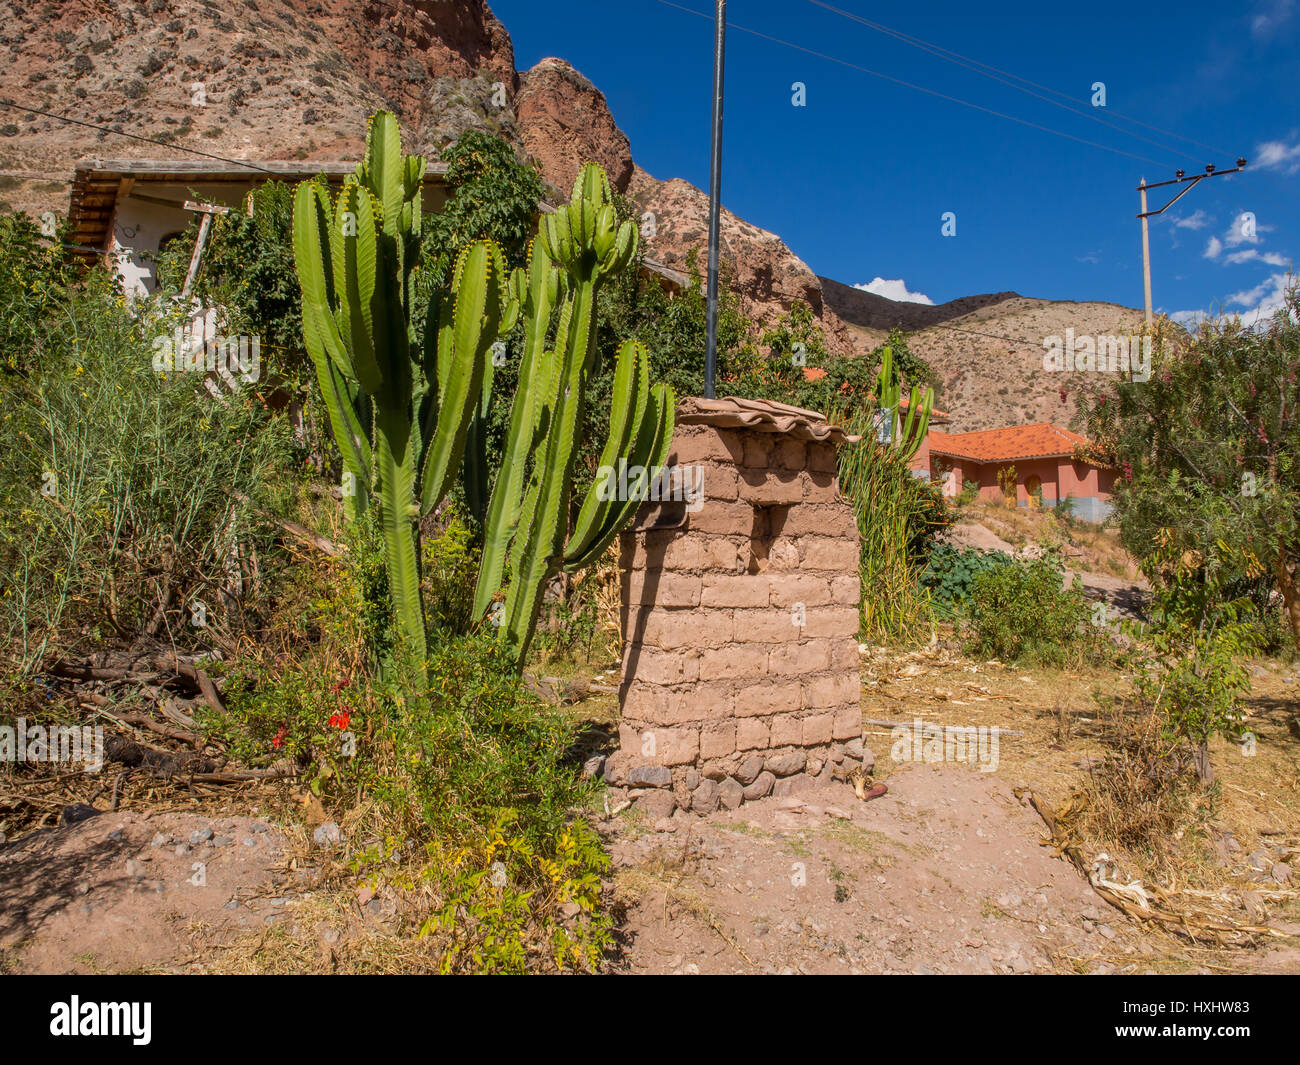 Urubamba, Peru - May 20, 2016: Small village in the Sacred Valley of the Incas, Peru Stock Photo